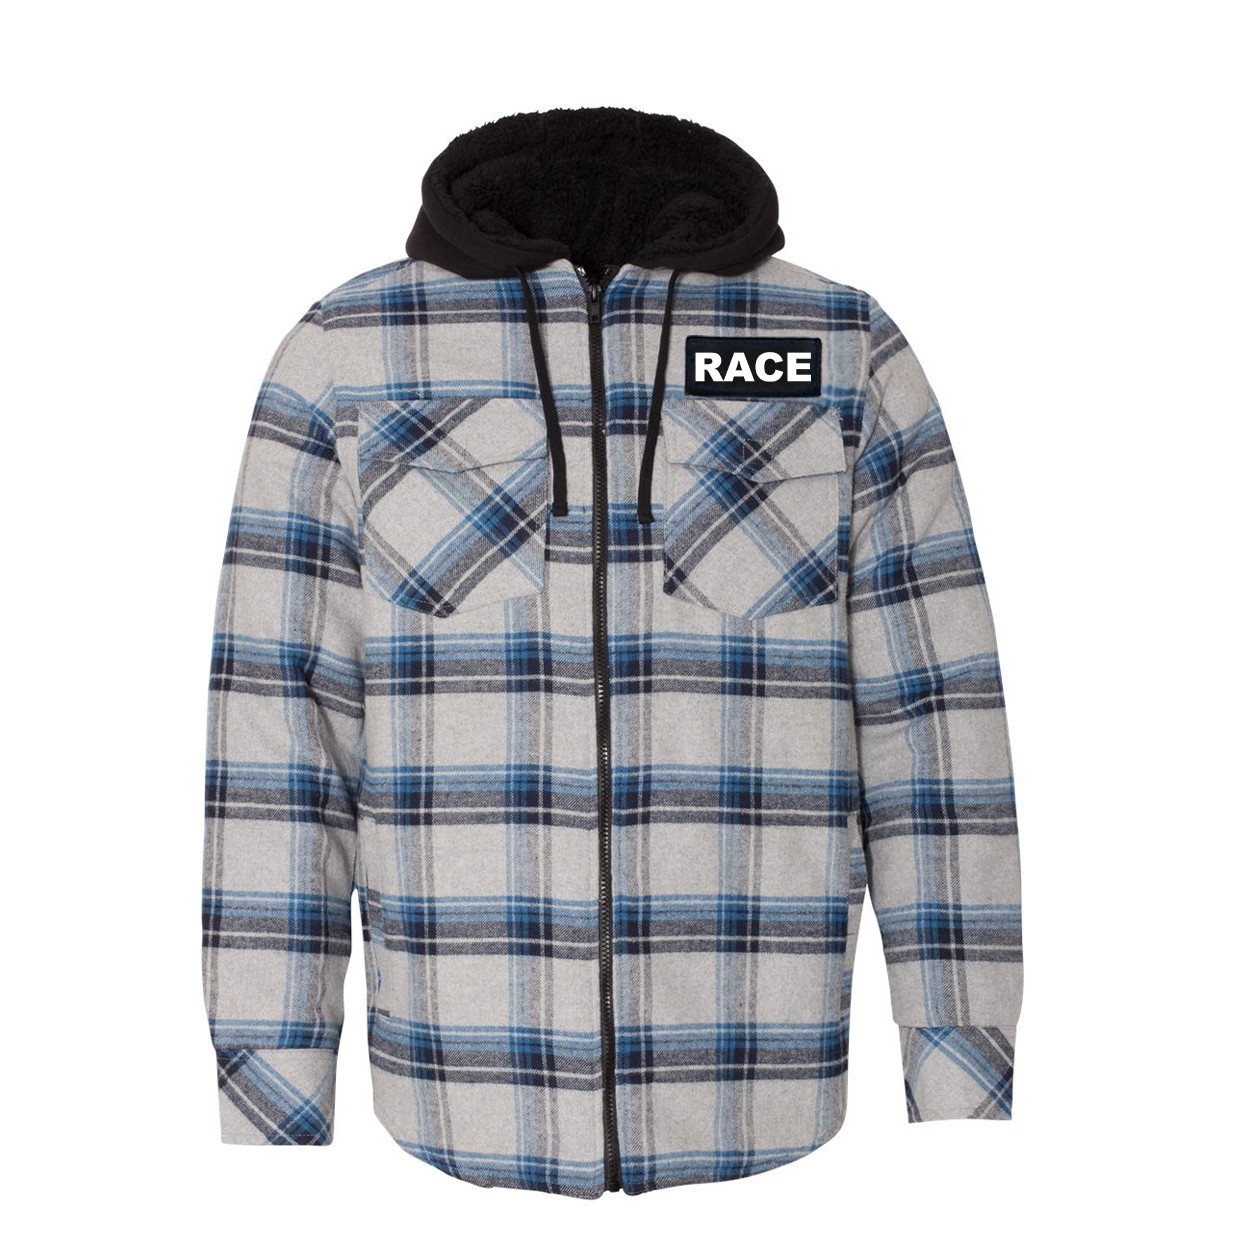 Race Brand Logo Classic Unisex Full Zip Woven Patch Hooded Flannel Jacket Gray/ Blue